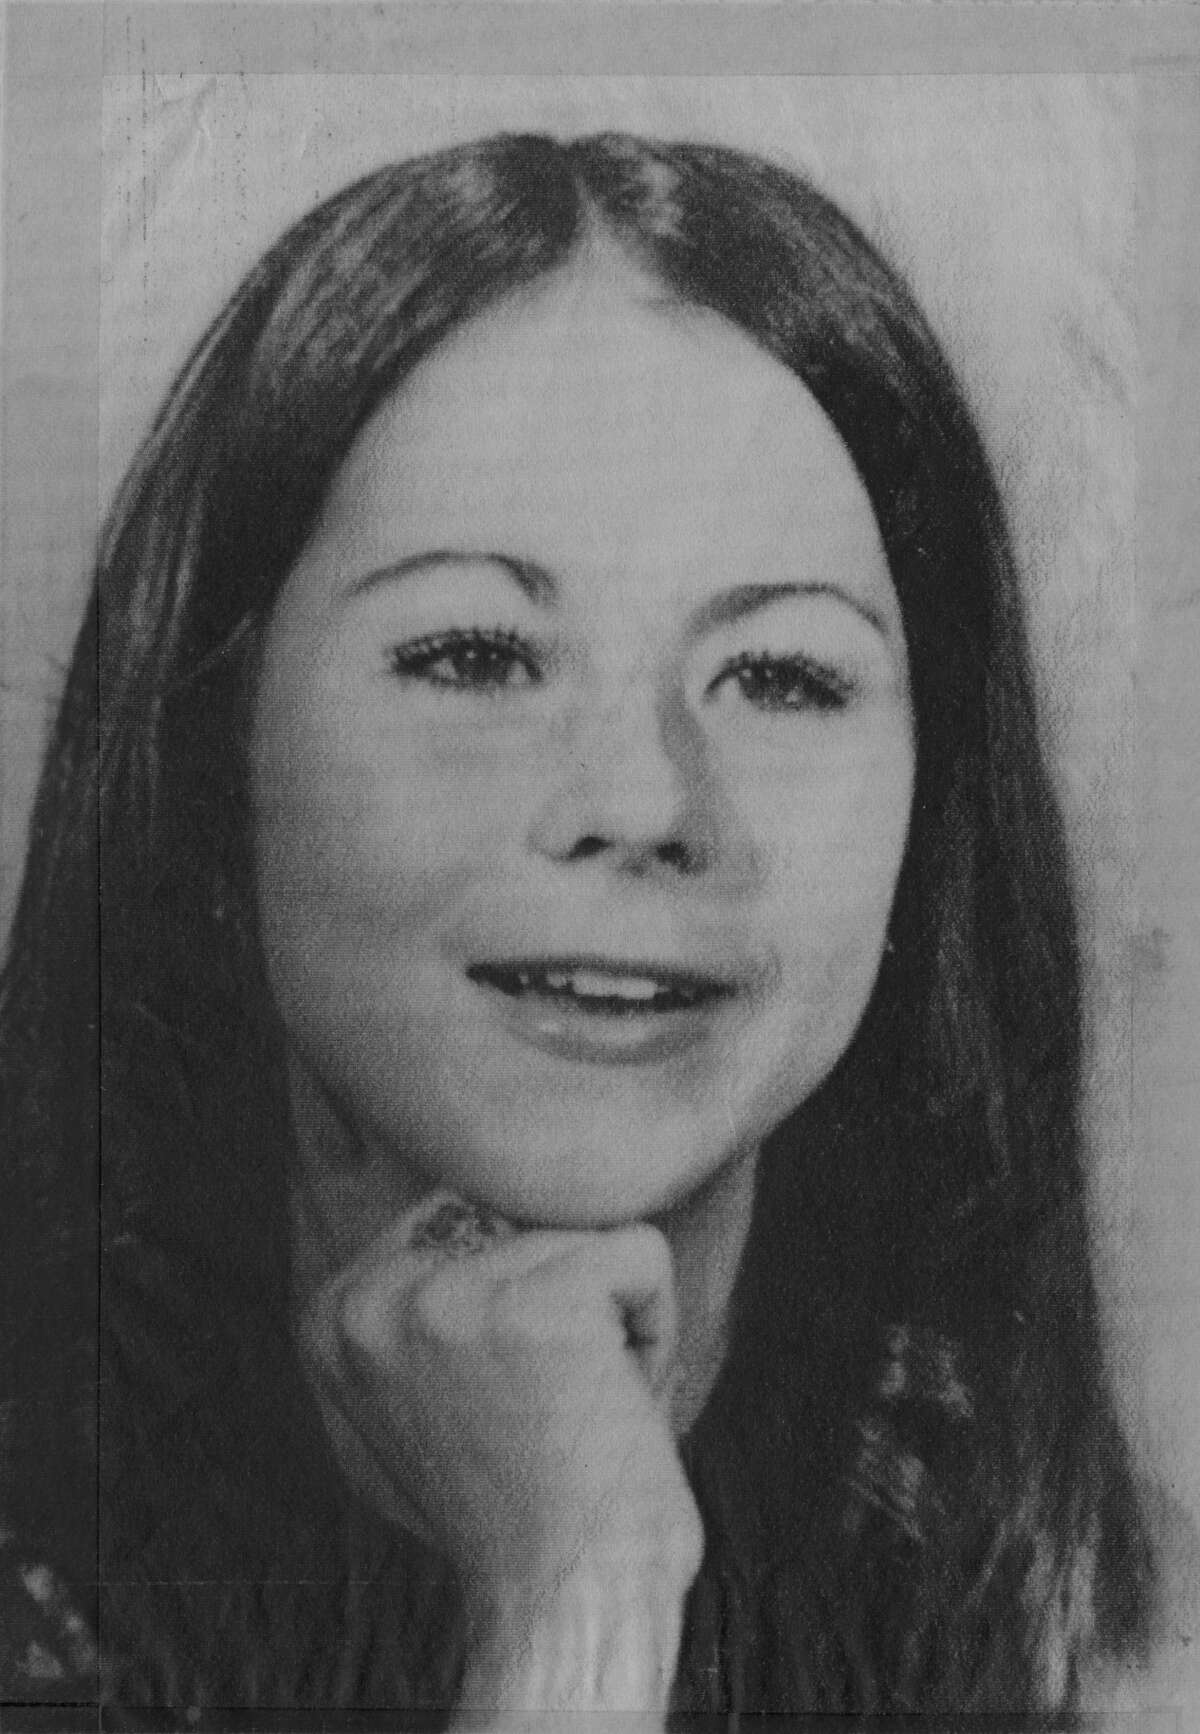 Maria Johnson, 15 The Galveston surfer girl and experienced water skier disappeared, along with Debbie Ackerman, after hitchhiking on Nov. 15, 1971. Their bodies were found in Turner Bayou three days later.